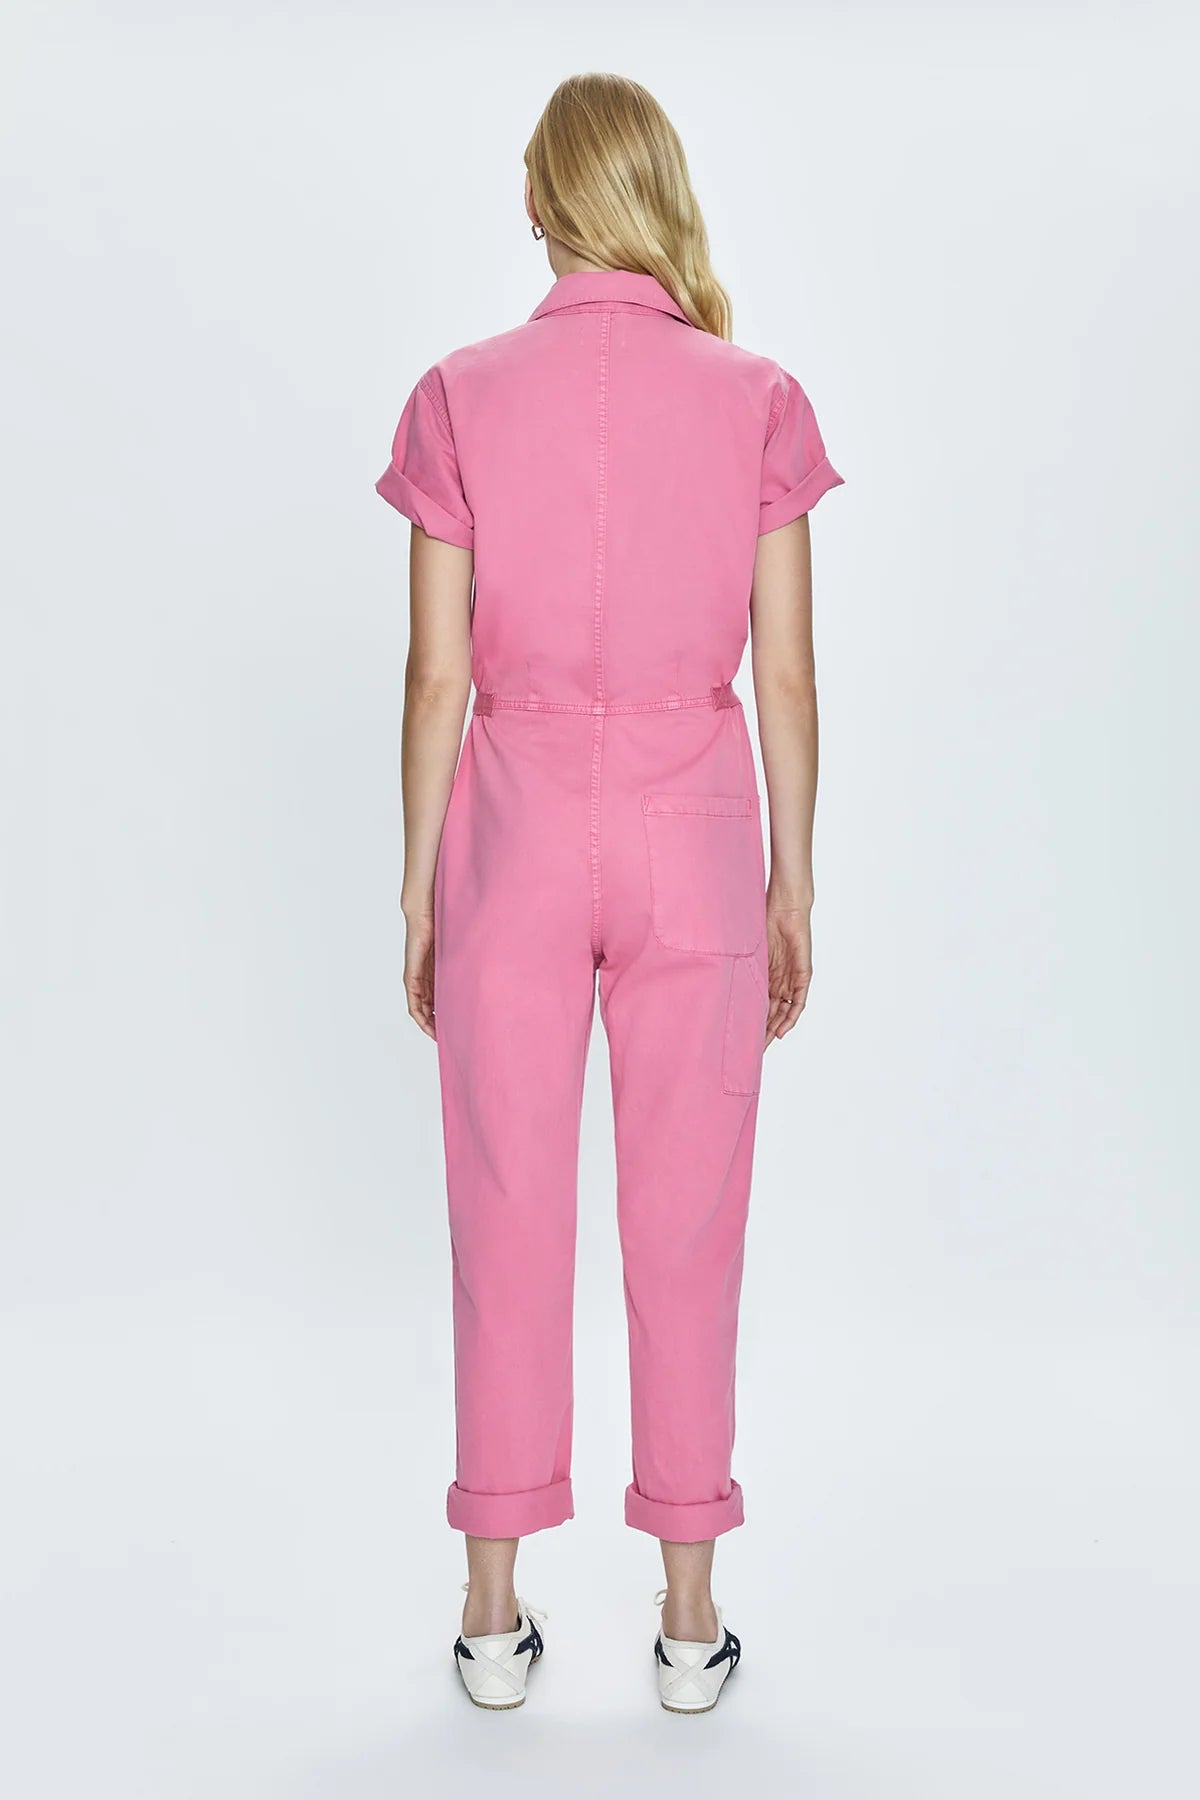 Grover Short Sleeve Field Suit - Styled With Claire Pistola